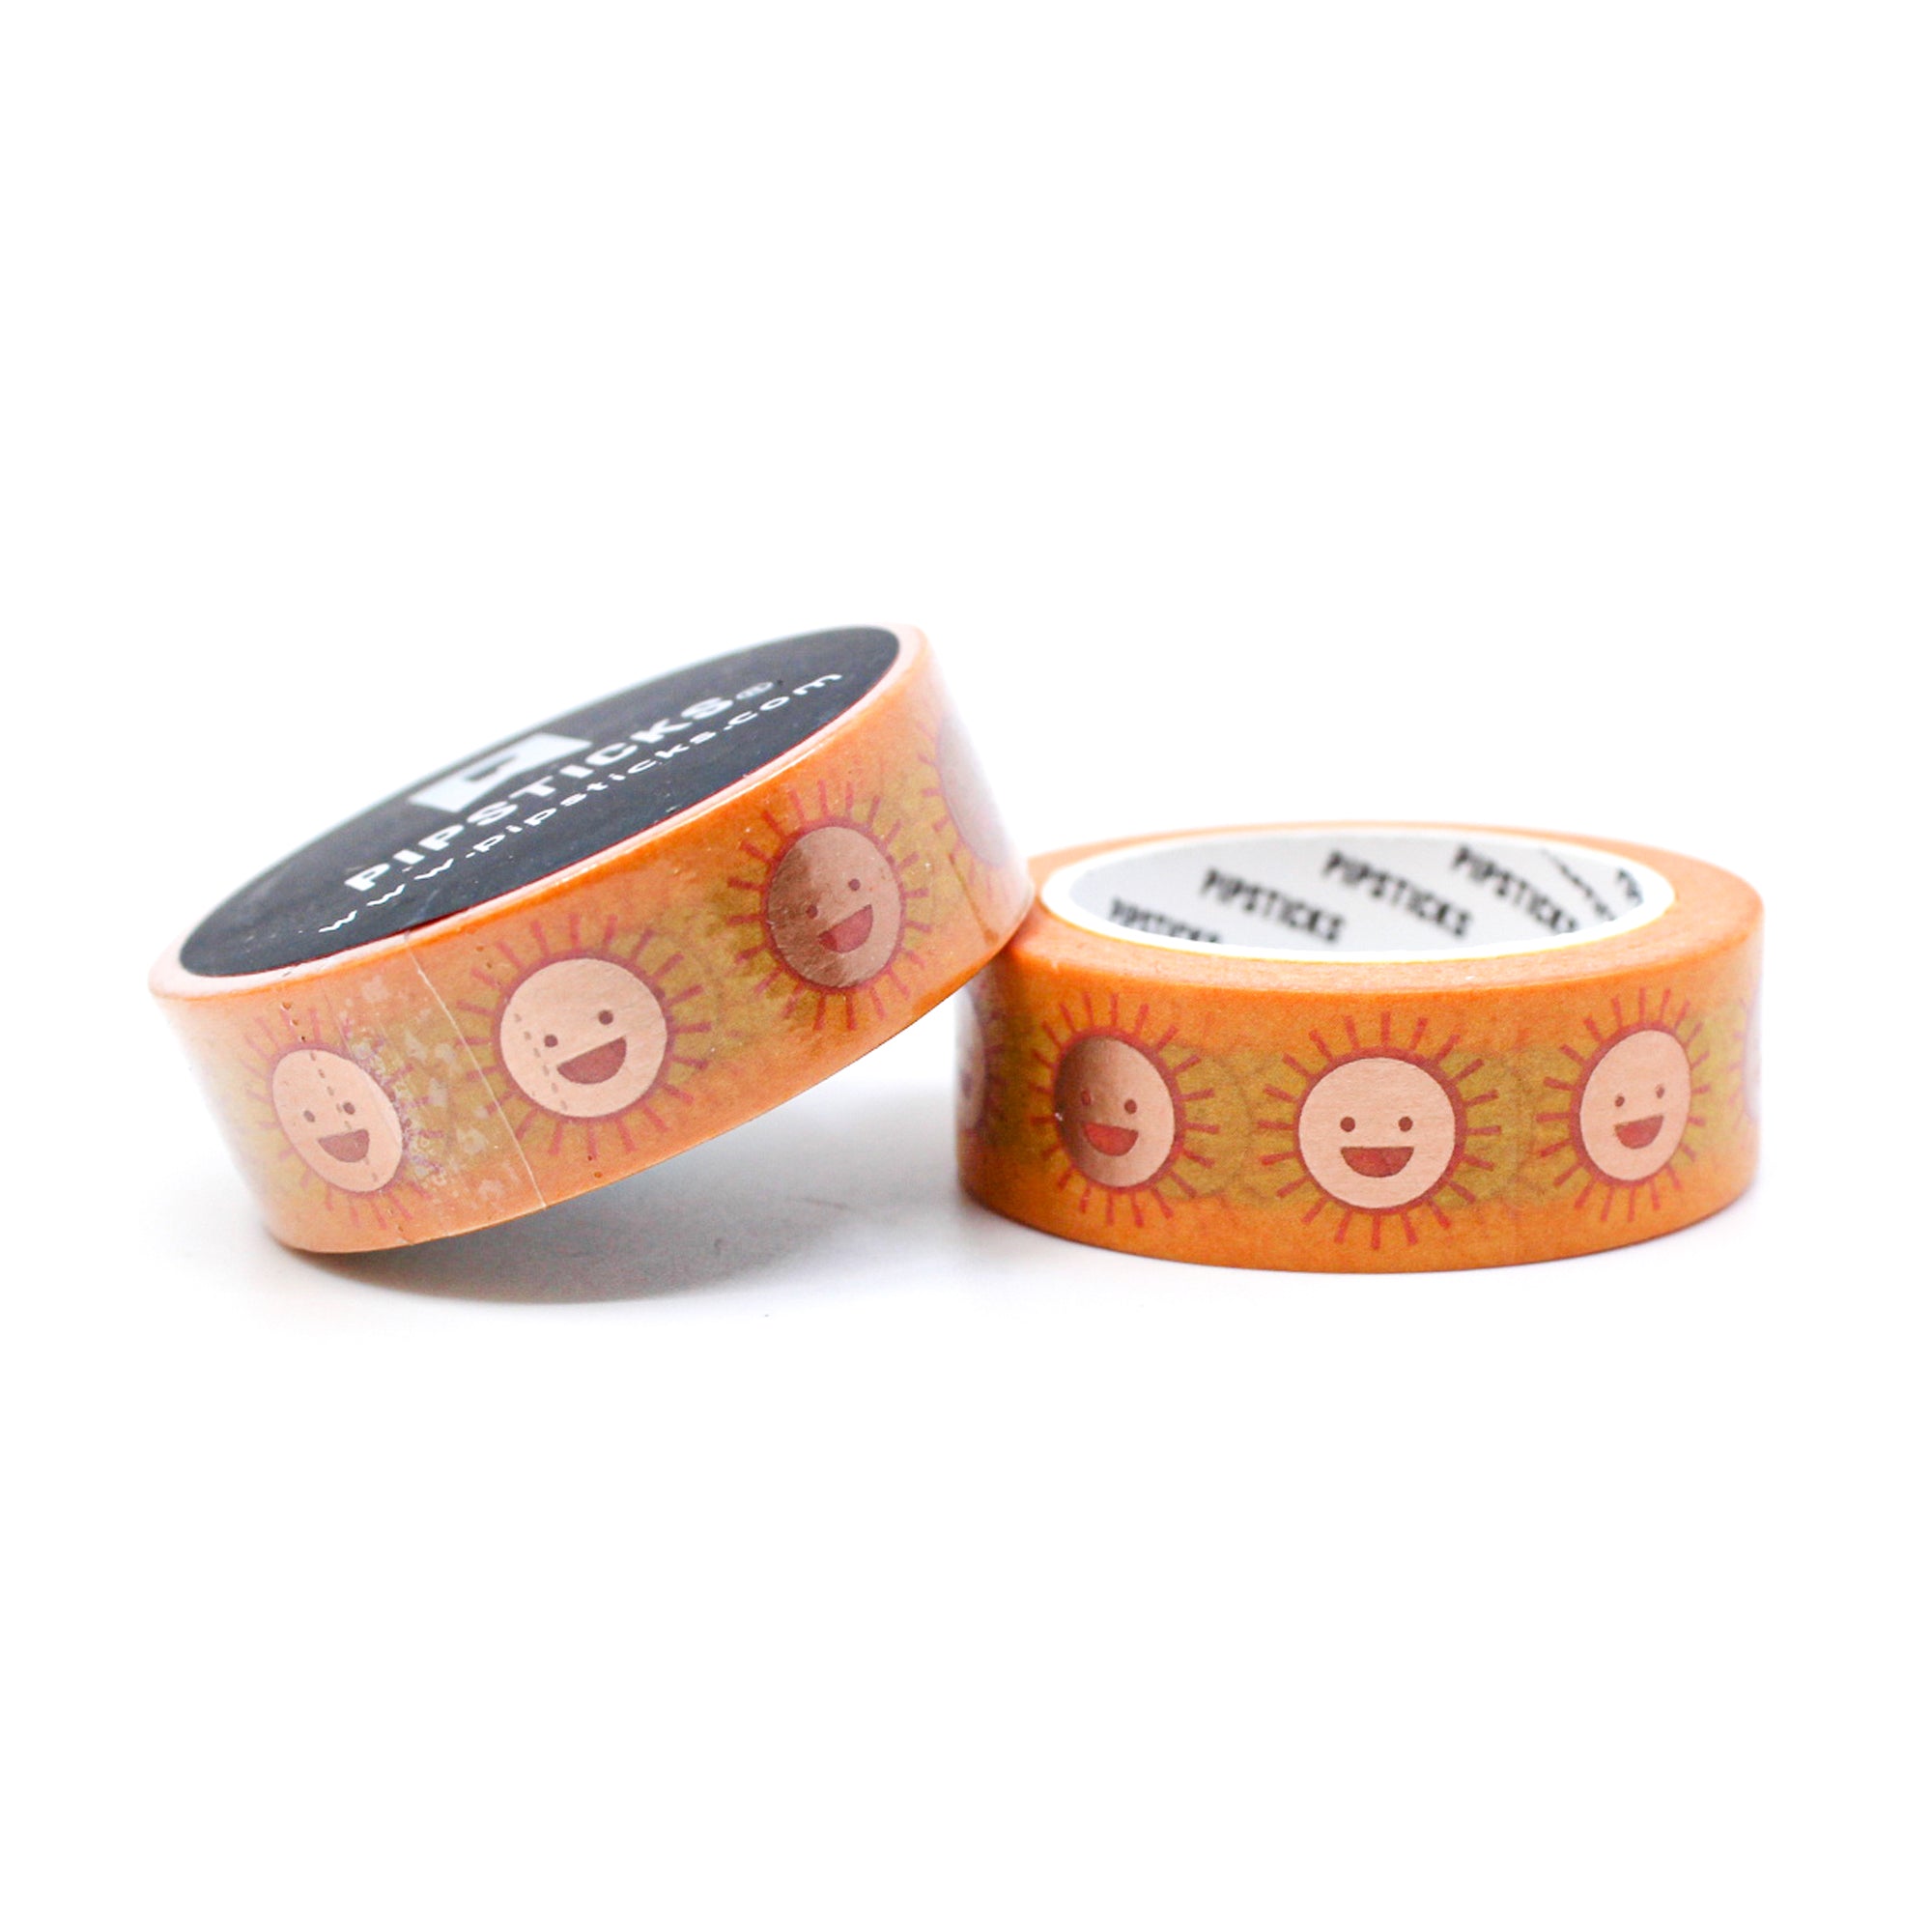 Add a radiant touch to your crafts with our smiling sun foil washi tape, featuring a delightful design of a beaming sun in shining foil, bringing warmth and happiness to your projects. This tape is designed by pipsticks and sold at BBB Supplies Craft Shop.